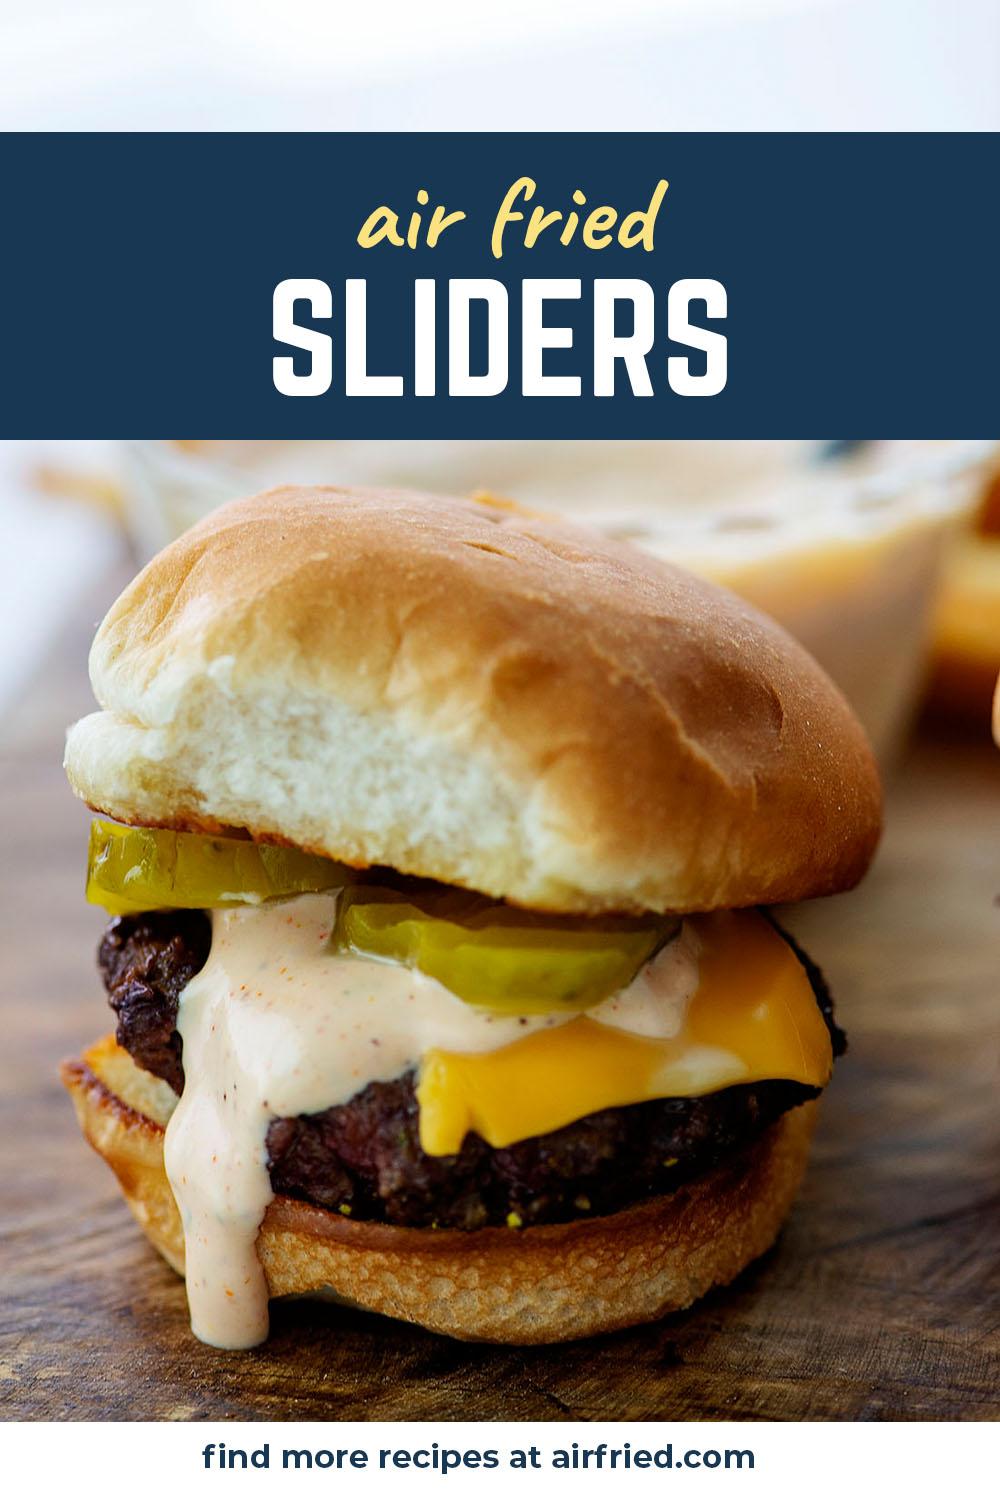 Slider with sauce, cheese, and pickles on it.